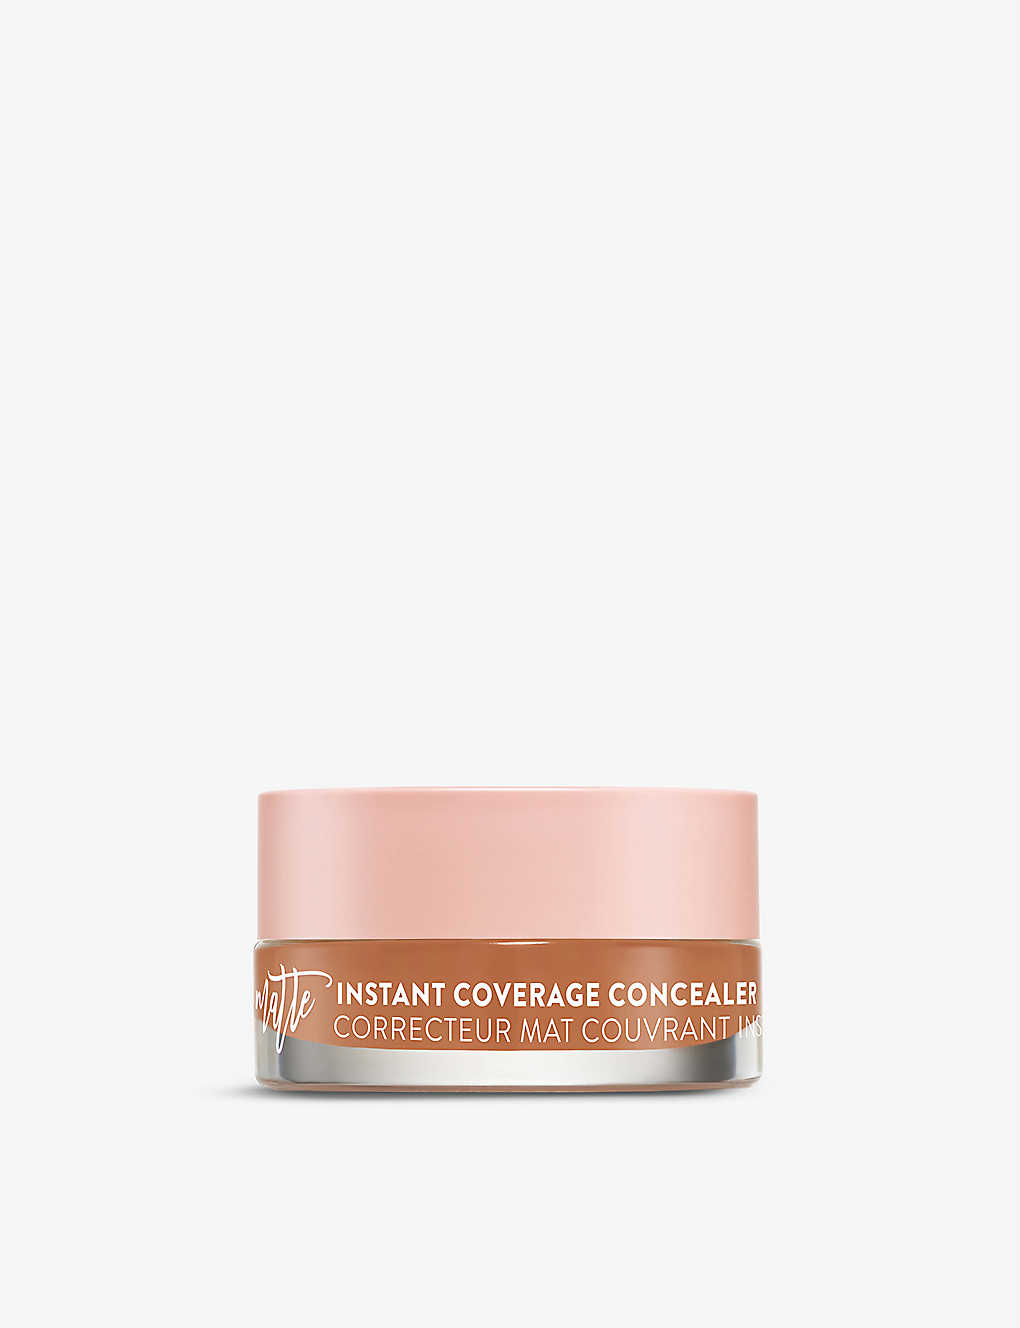 Too Faced Peach Perfect Instant Coverage Concealer 7g In Rose Tea